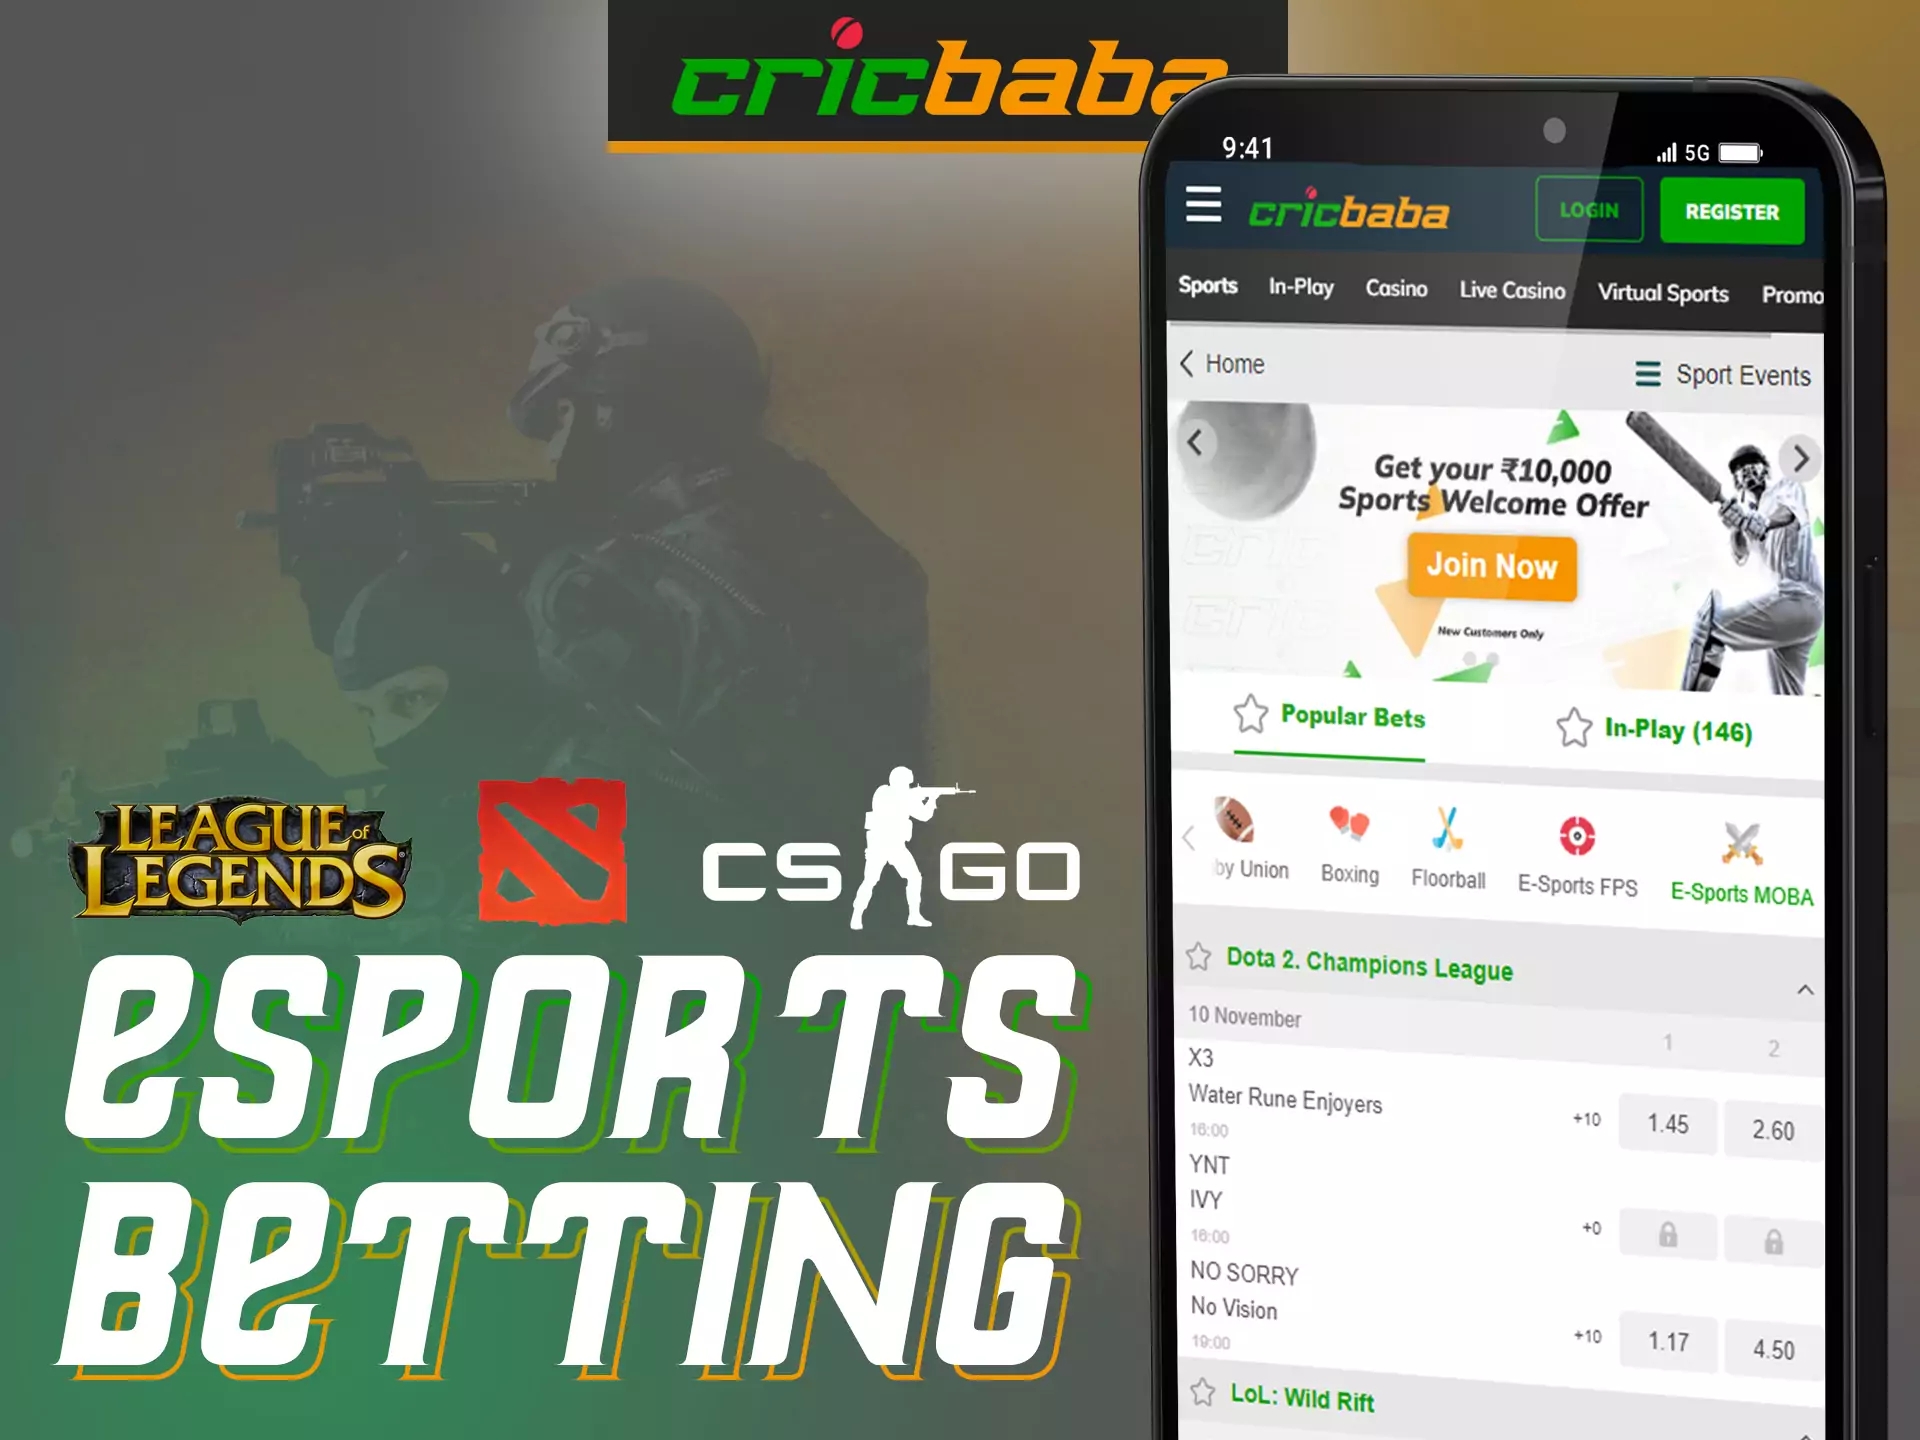 Support your favorite cyber team, place a bet on Cricbaba.